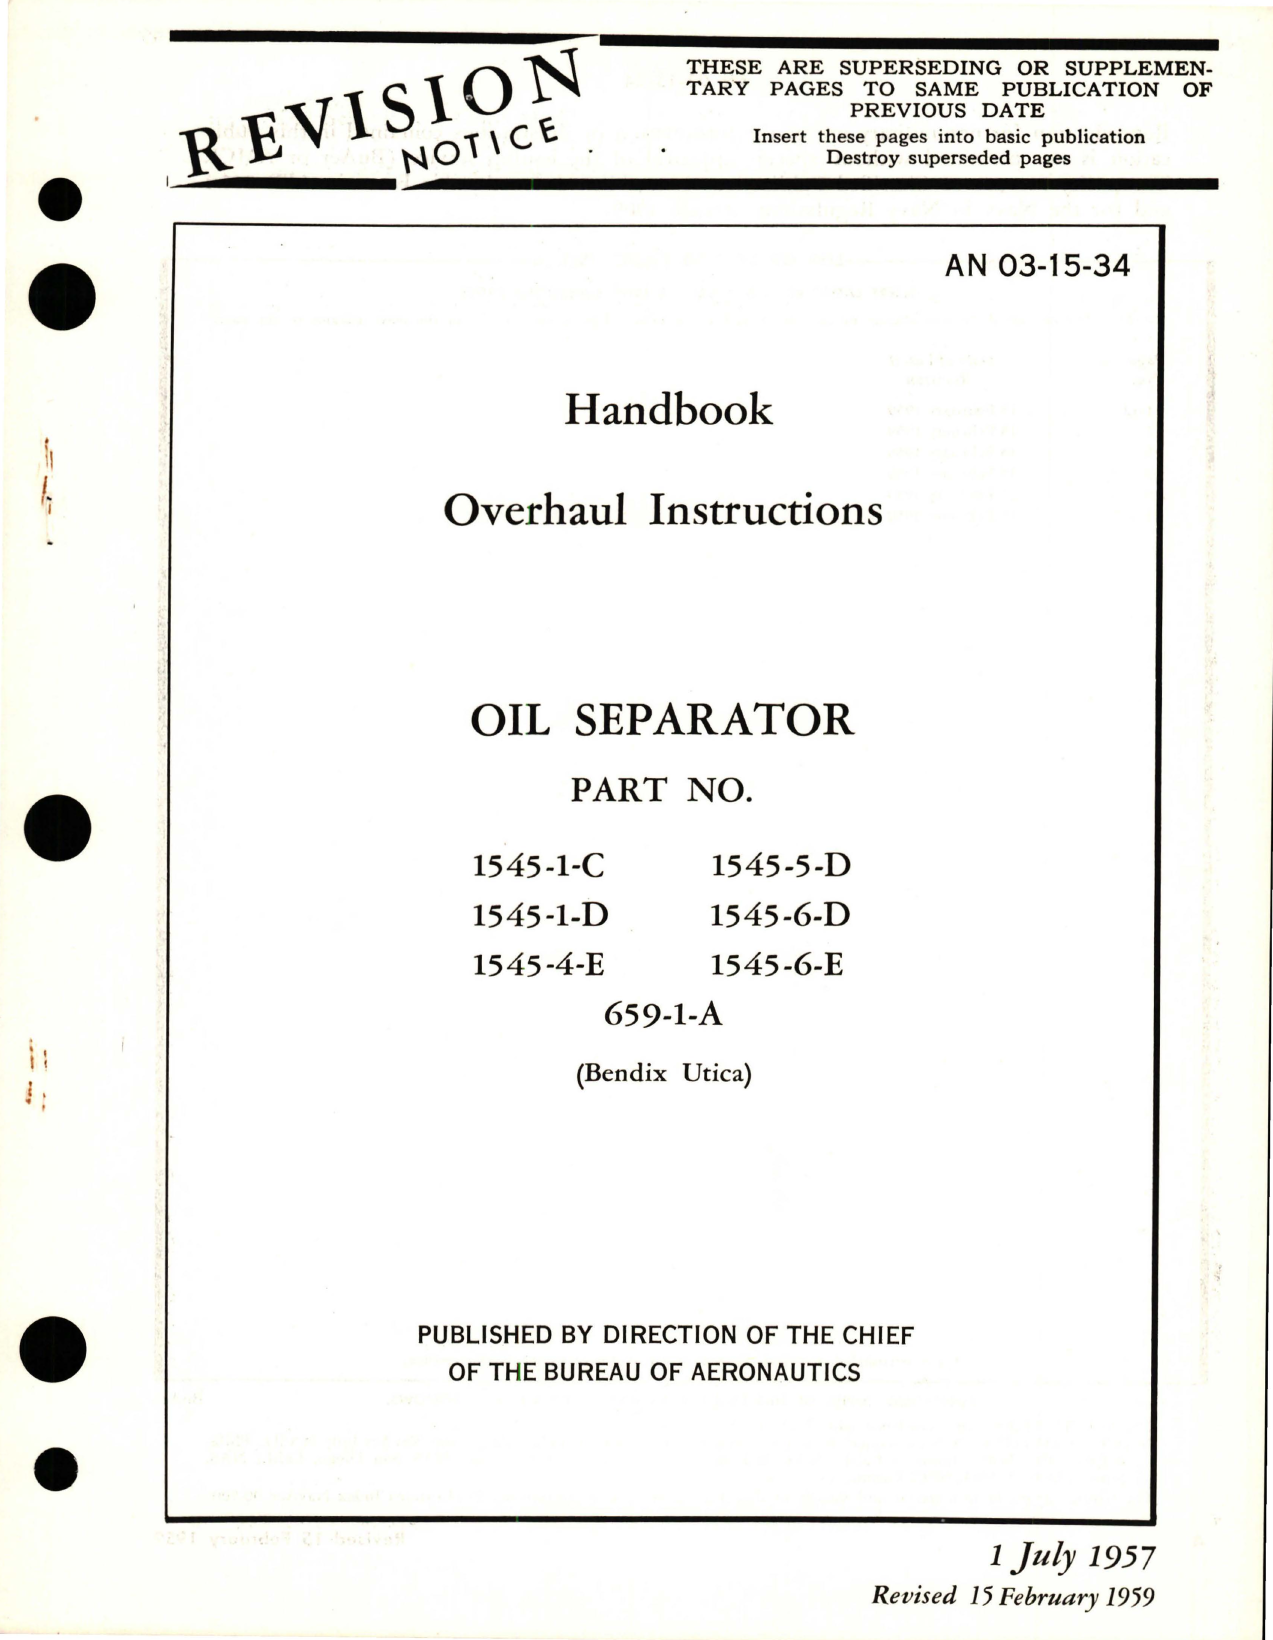 Sample page 1 from AirCorps Library document: Overhaul Instructions for Oil Separator - Parts 1545-1-C, 1545-1-D, 1545-4-E, 1545-5-D, 1545-6-D, 1545-6-E, 659-1-A